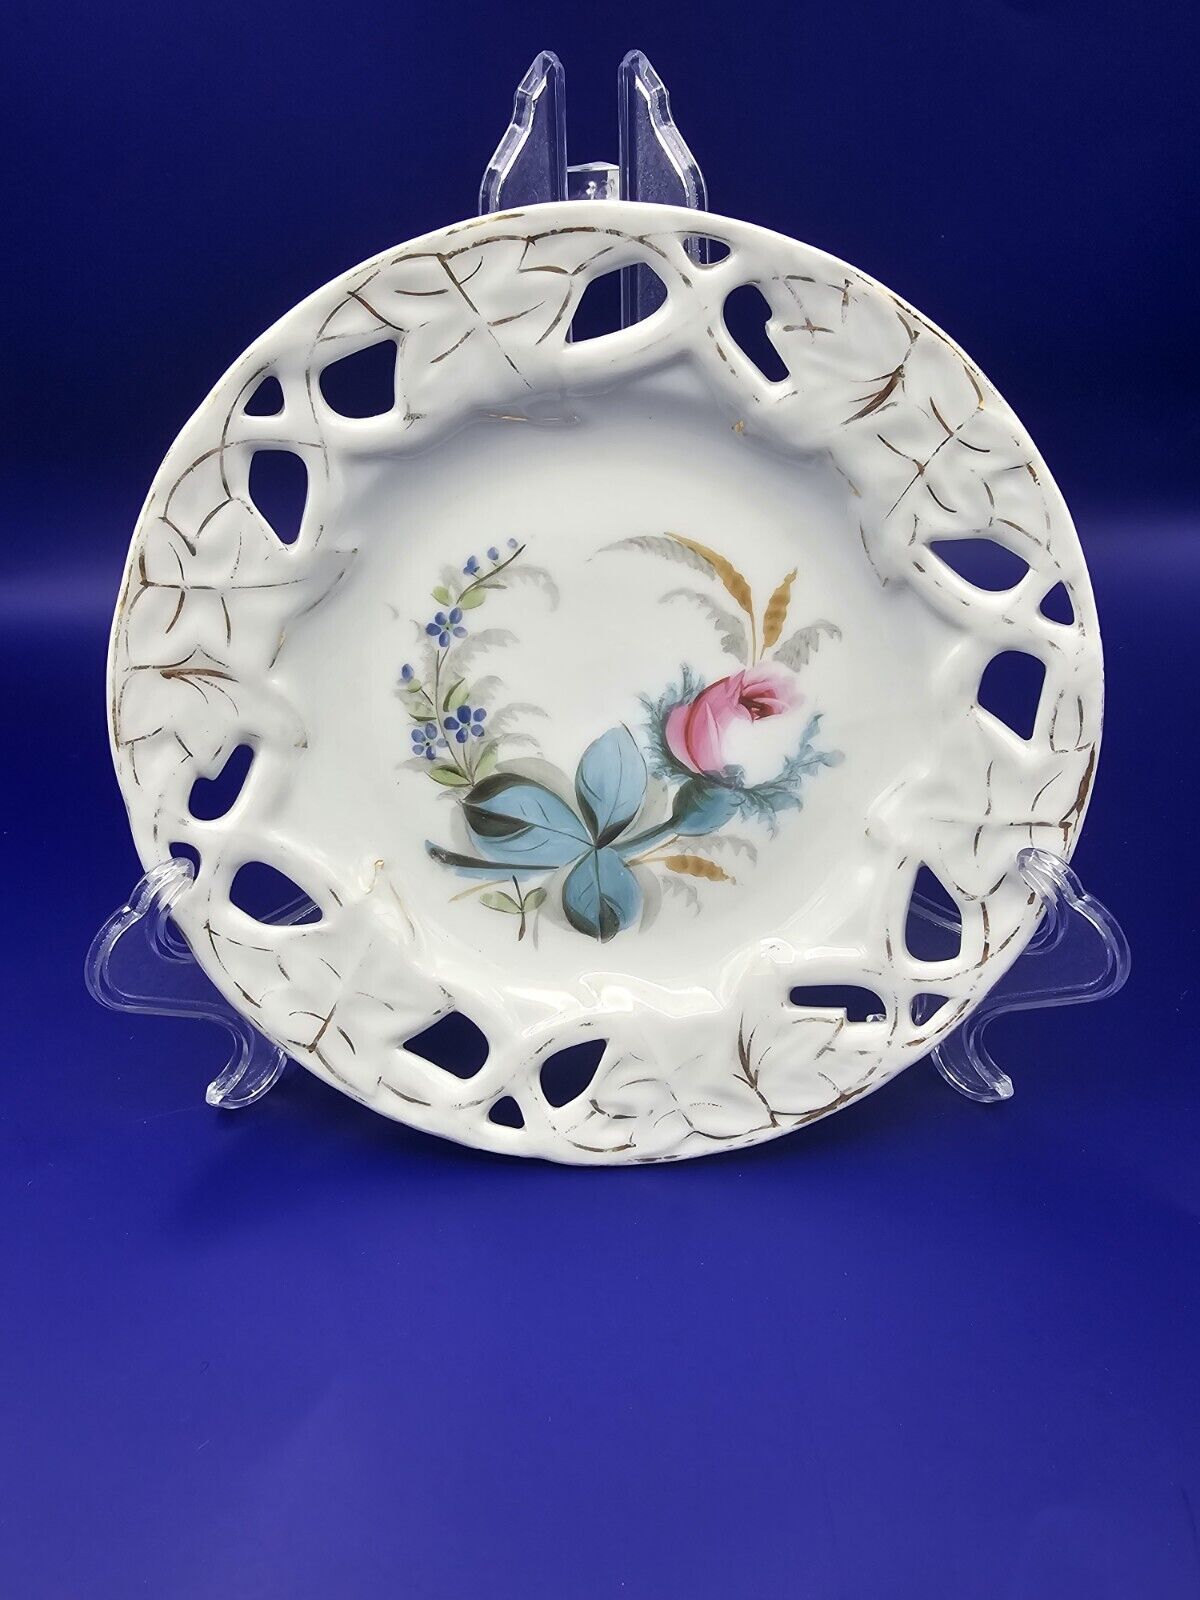 Small Vintage Openwork Plate With Floral Design, Rose, Handpainted